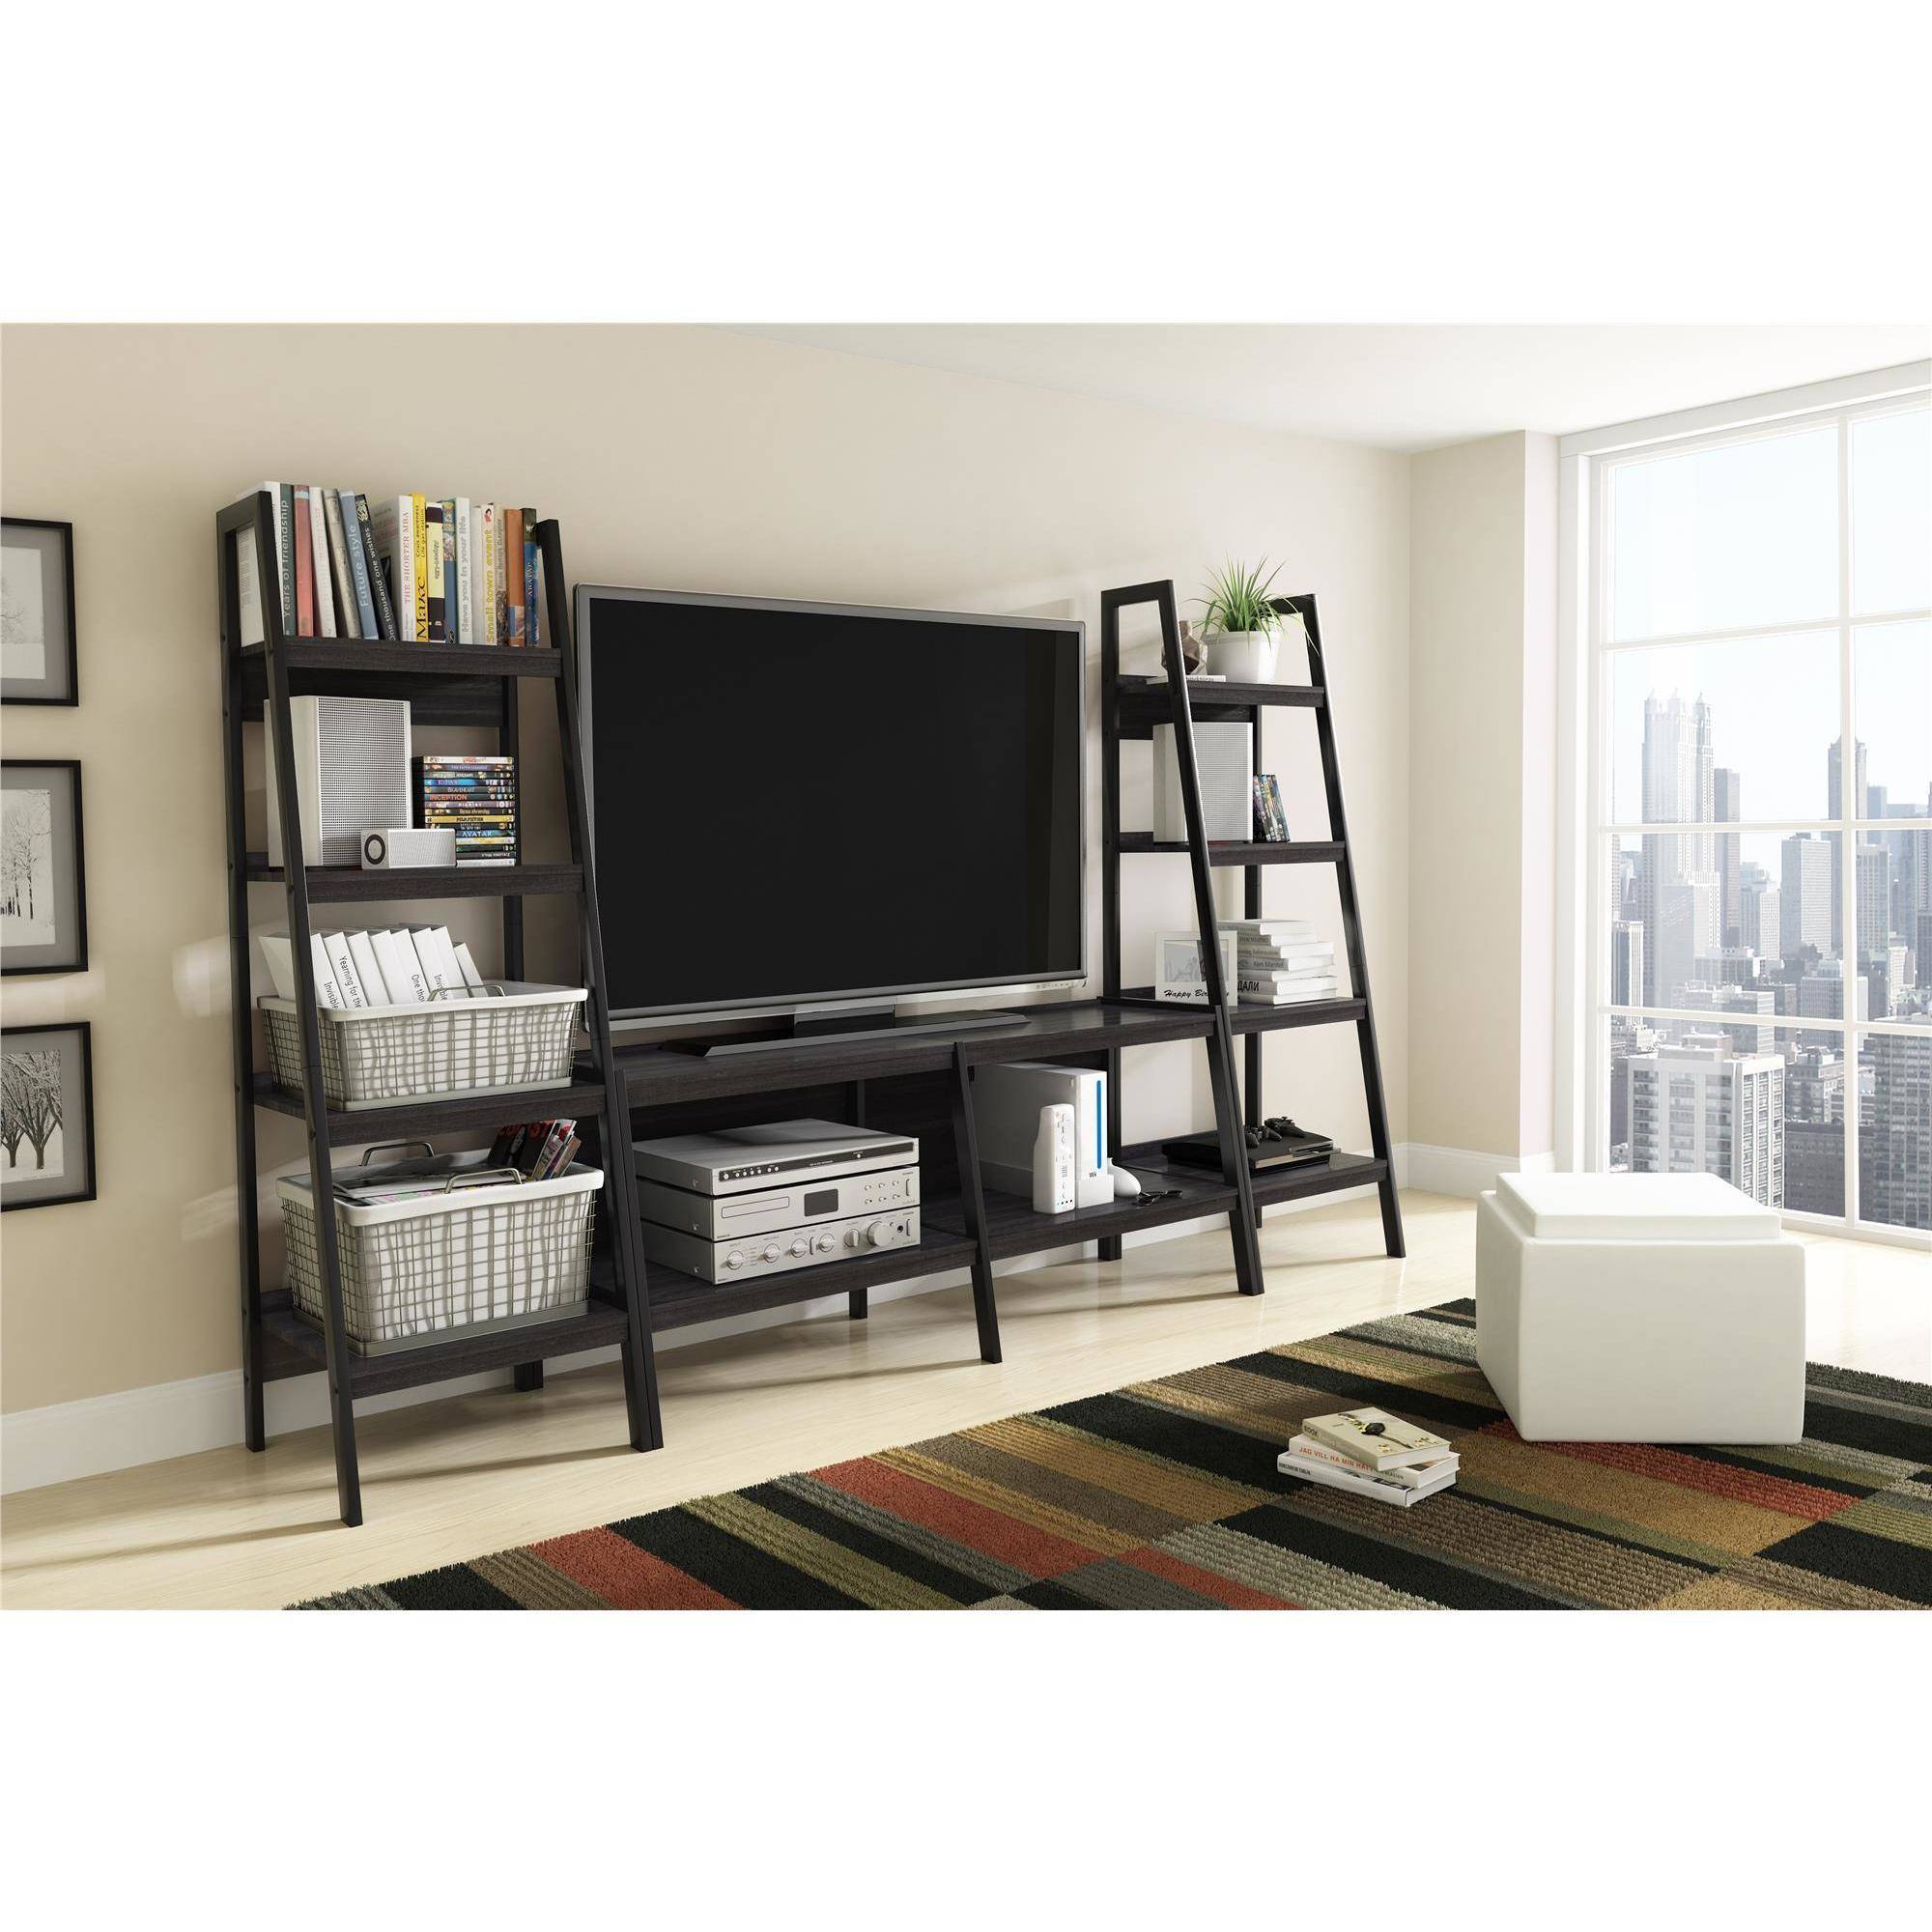 Home Entertainment Center TV Stand w/ 2 Side Bookcases ...